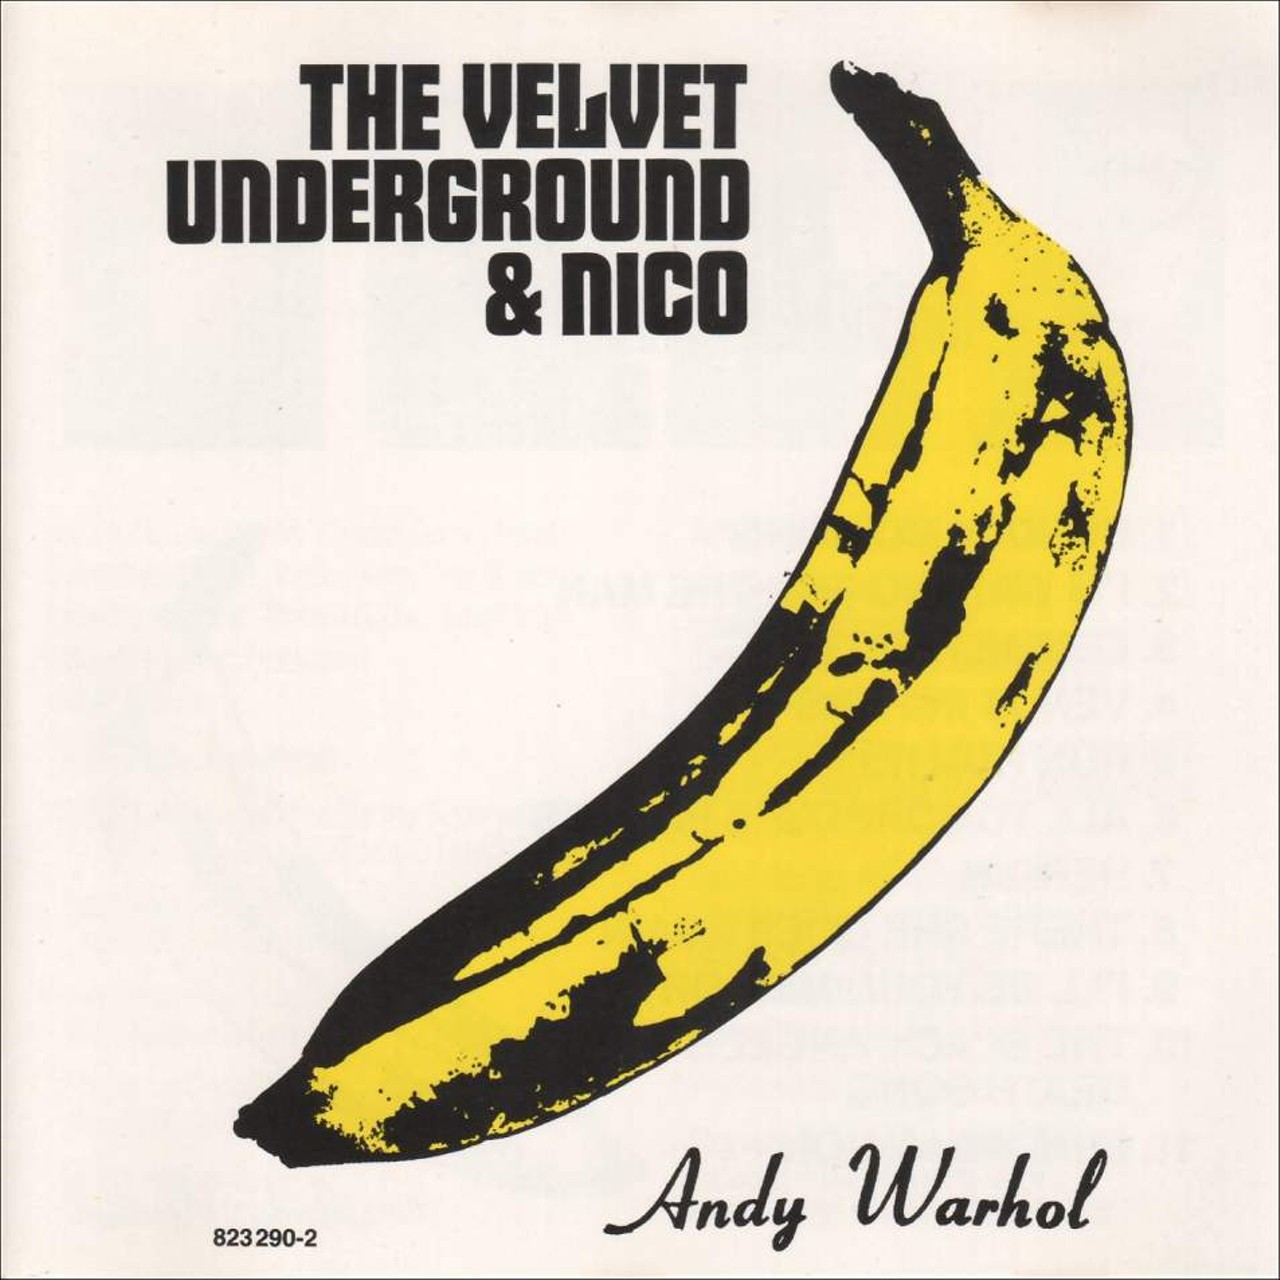 The Velvet Underground & Nico
Lou Reed, founding member of the Velvet Underground, died on Sunday, October 27. He was 71-years-old. No details have been made available, but the singer, songwriter and guitarist underwent a liver transplant in May.
With the Velvet Underground, and particularly the debut The Velvet Underground & Nico, Reed helped redefine what it meant to be in a rock ’n’ roll band.